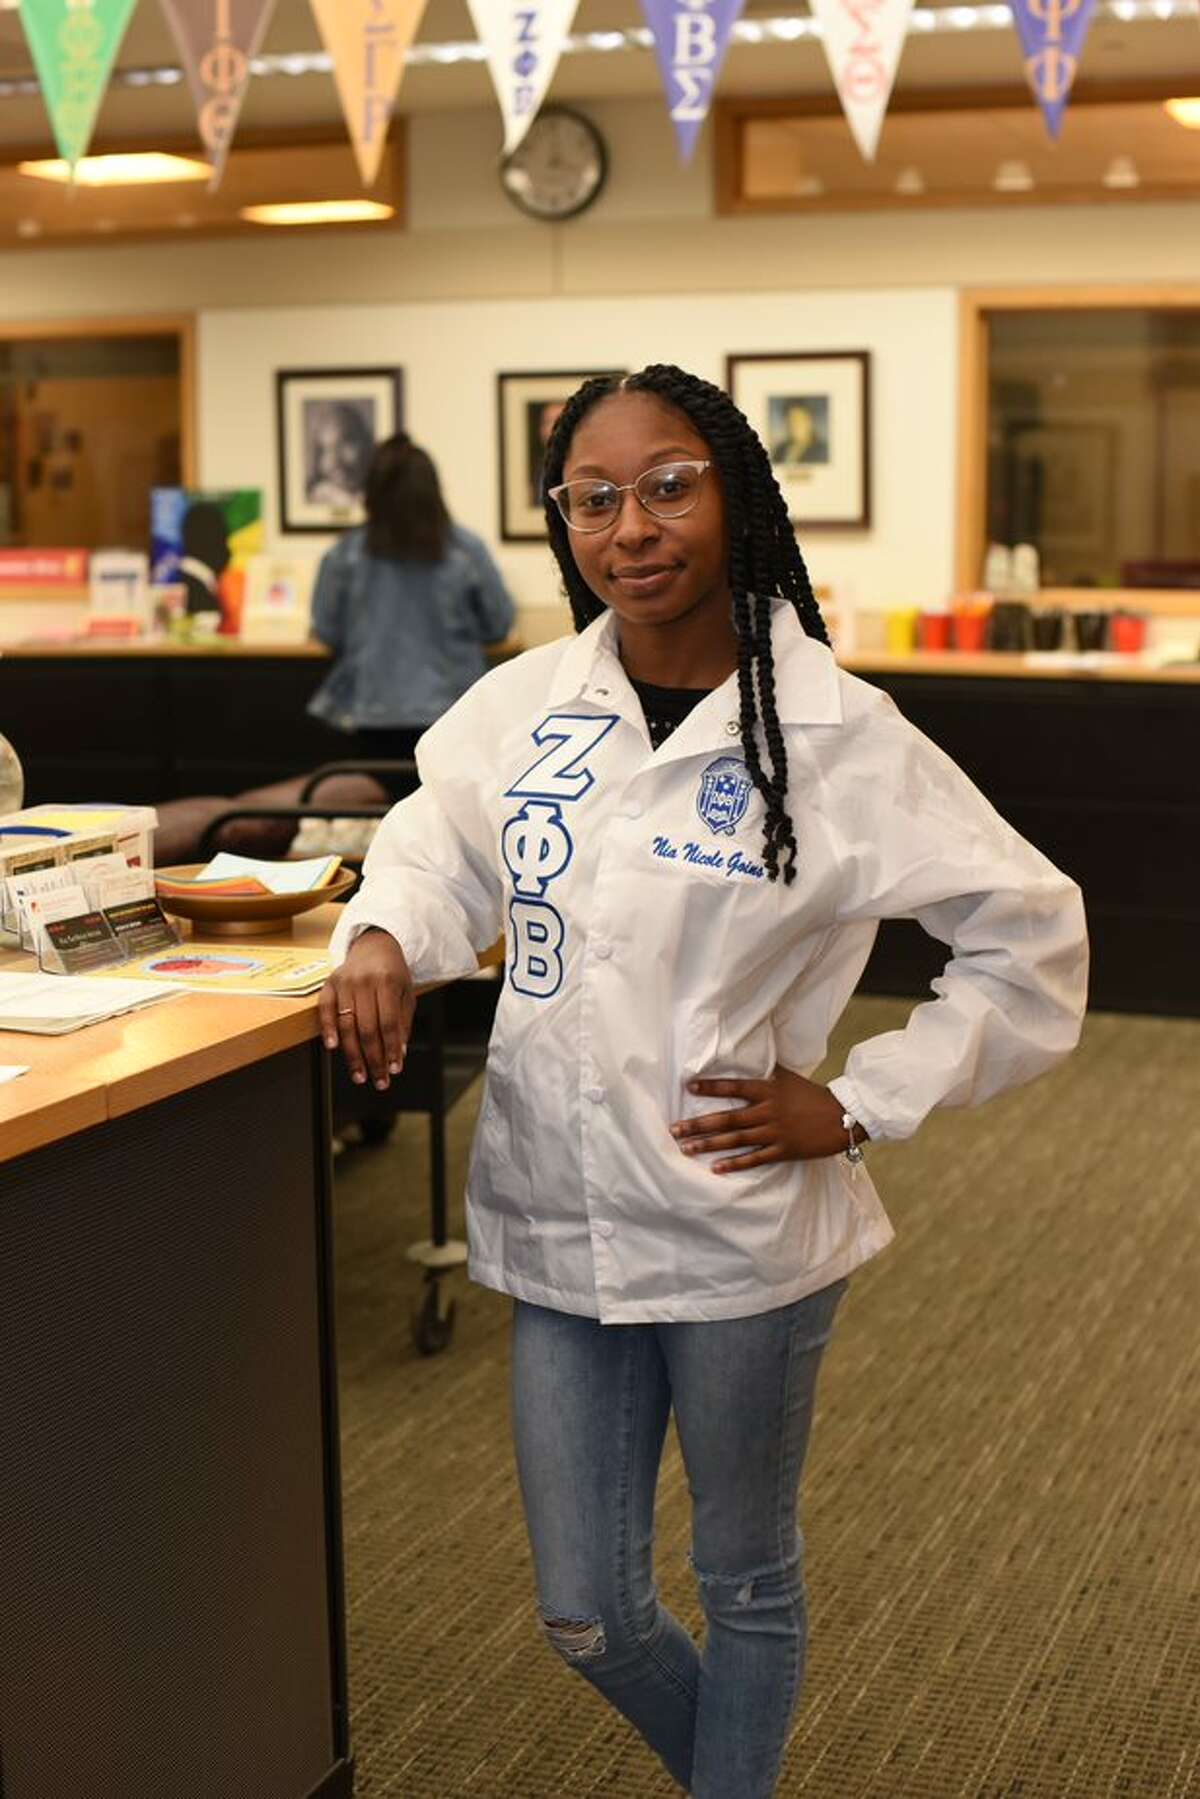 Experiences gained as a young student and family member helped shape the perceptions and intentions of Muskegon’s Nia Goins. 